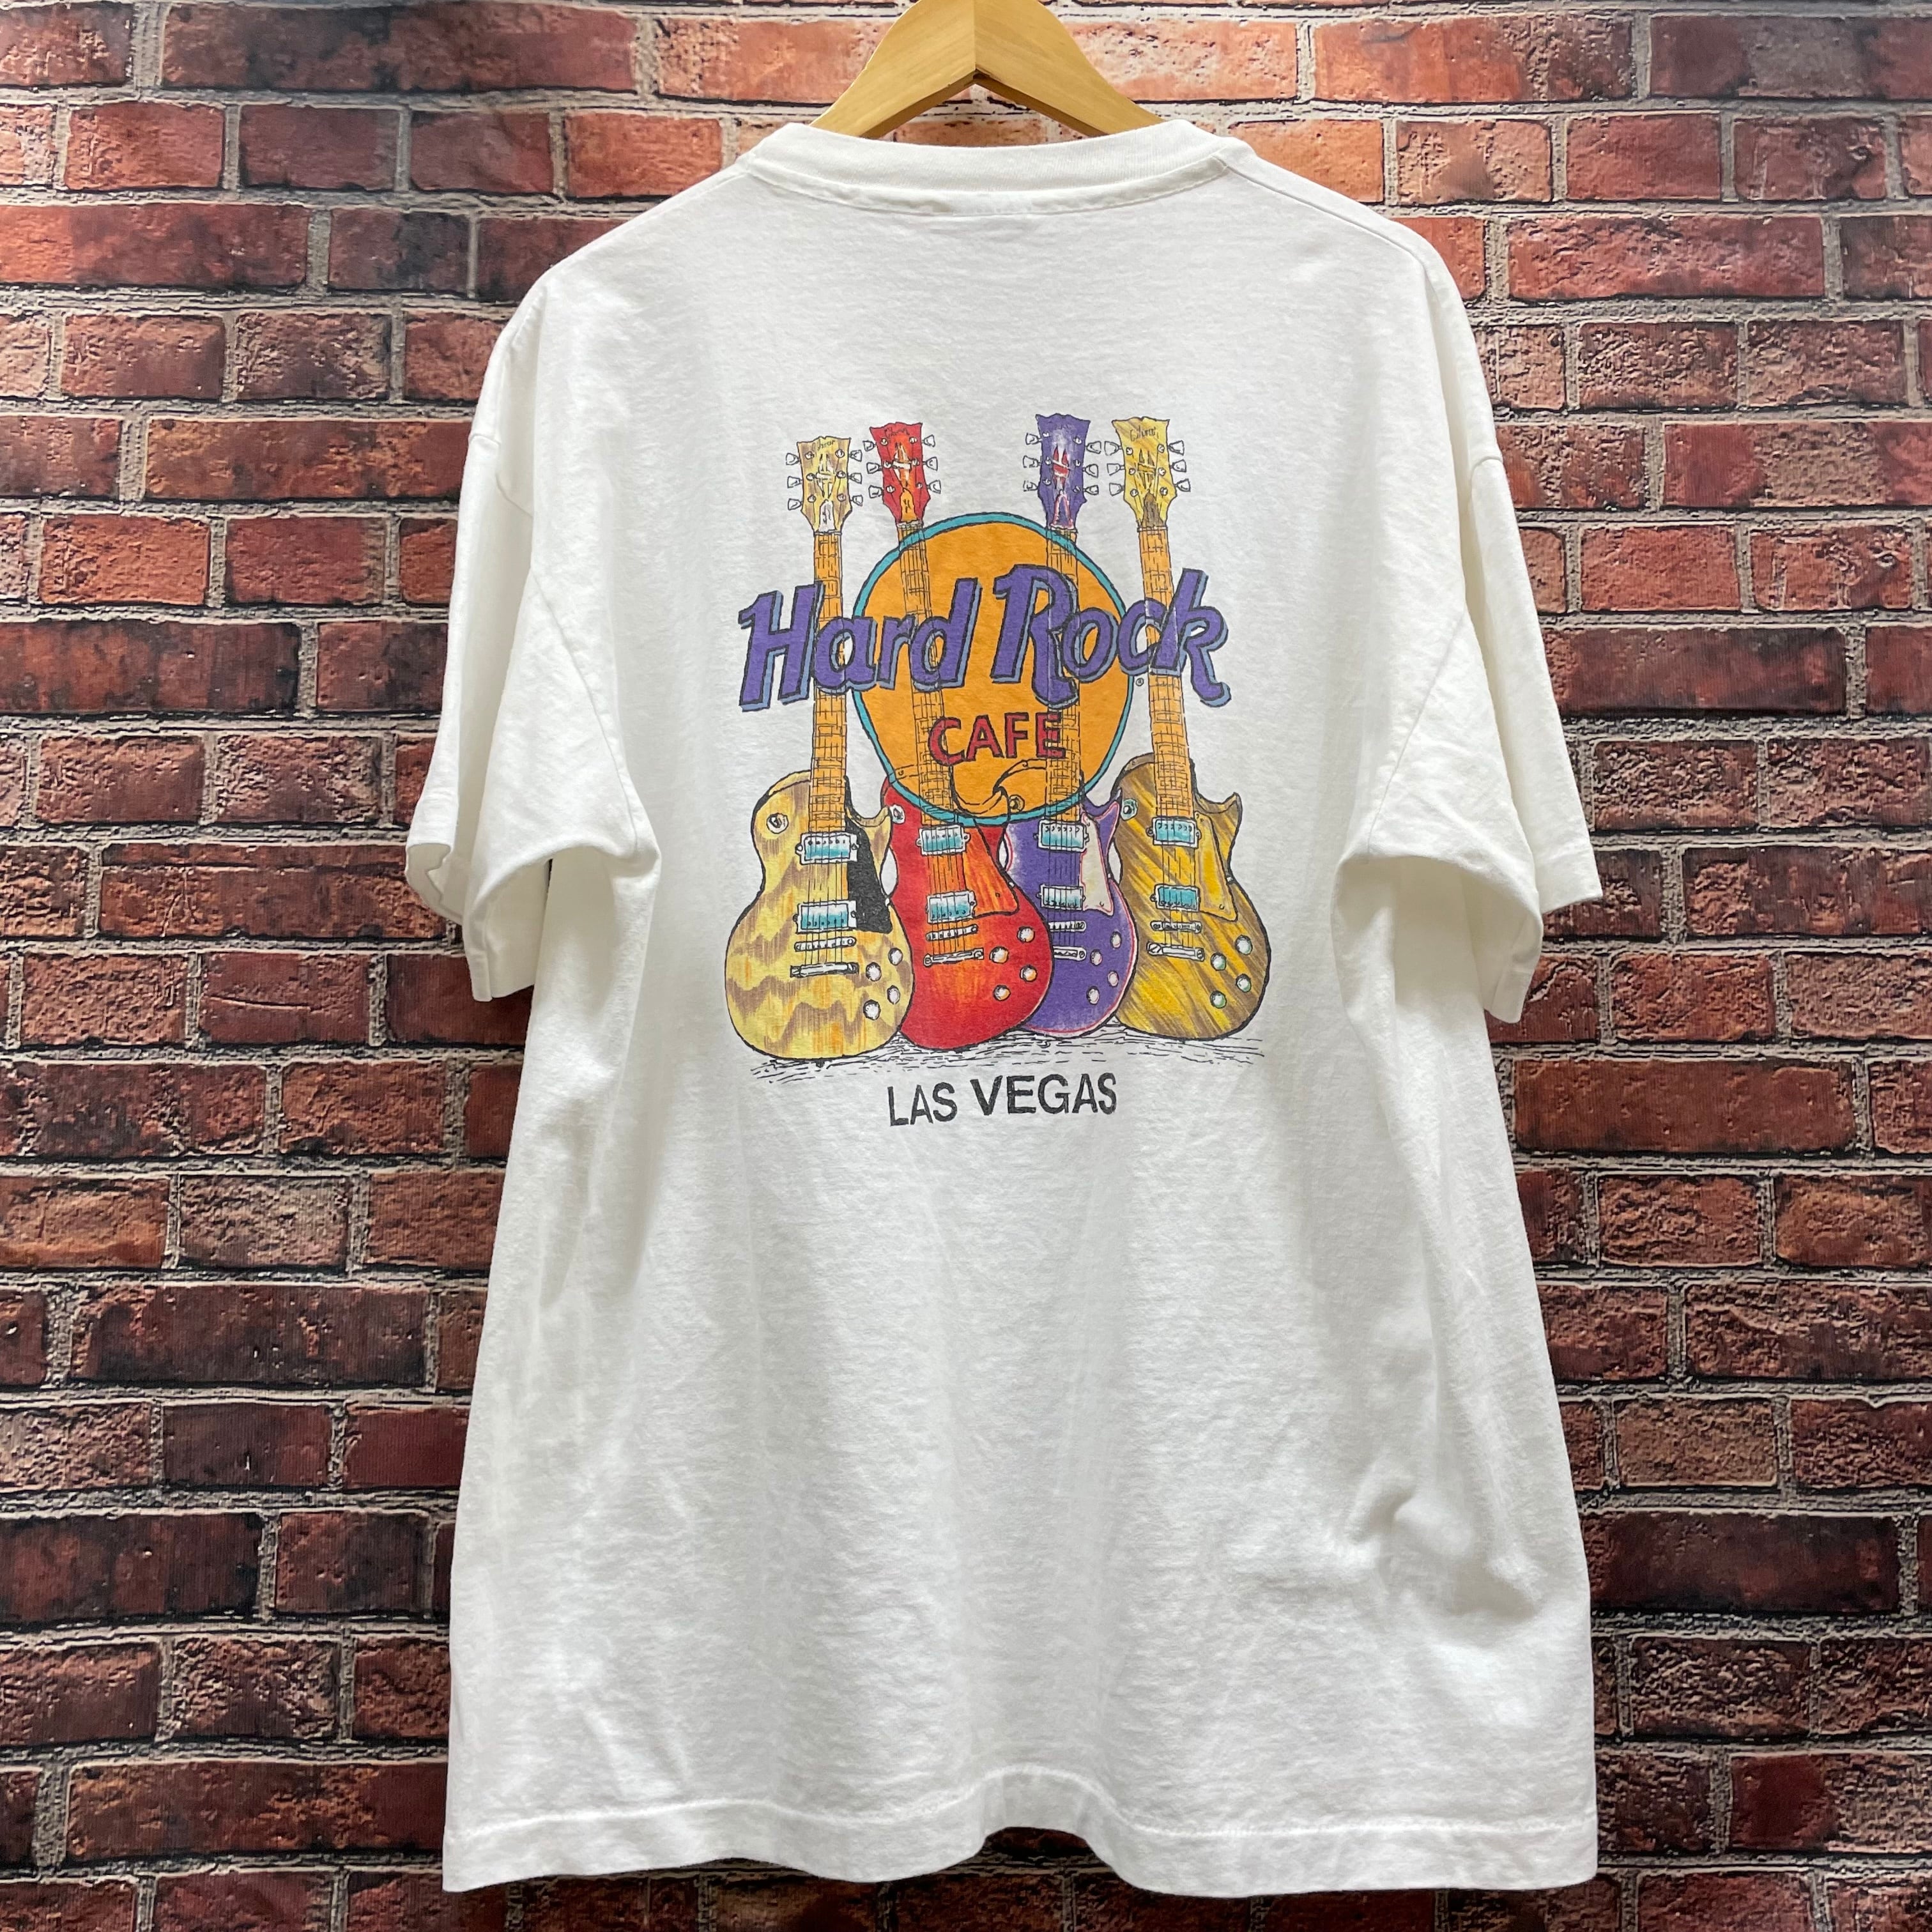 90's USA製 Hard Rock CAFE ハードロックカフェ Tシャツ